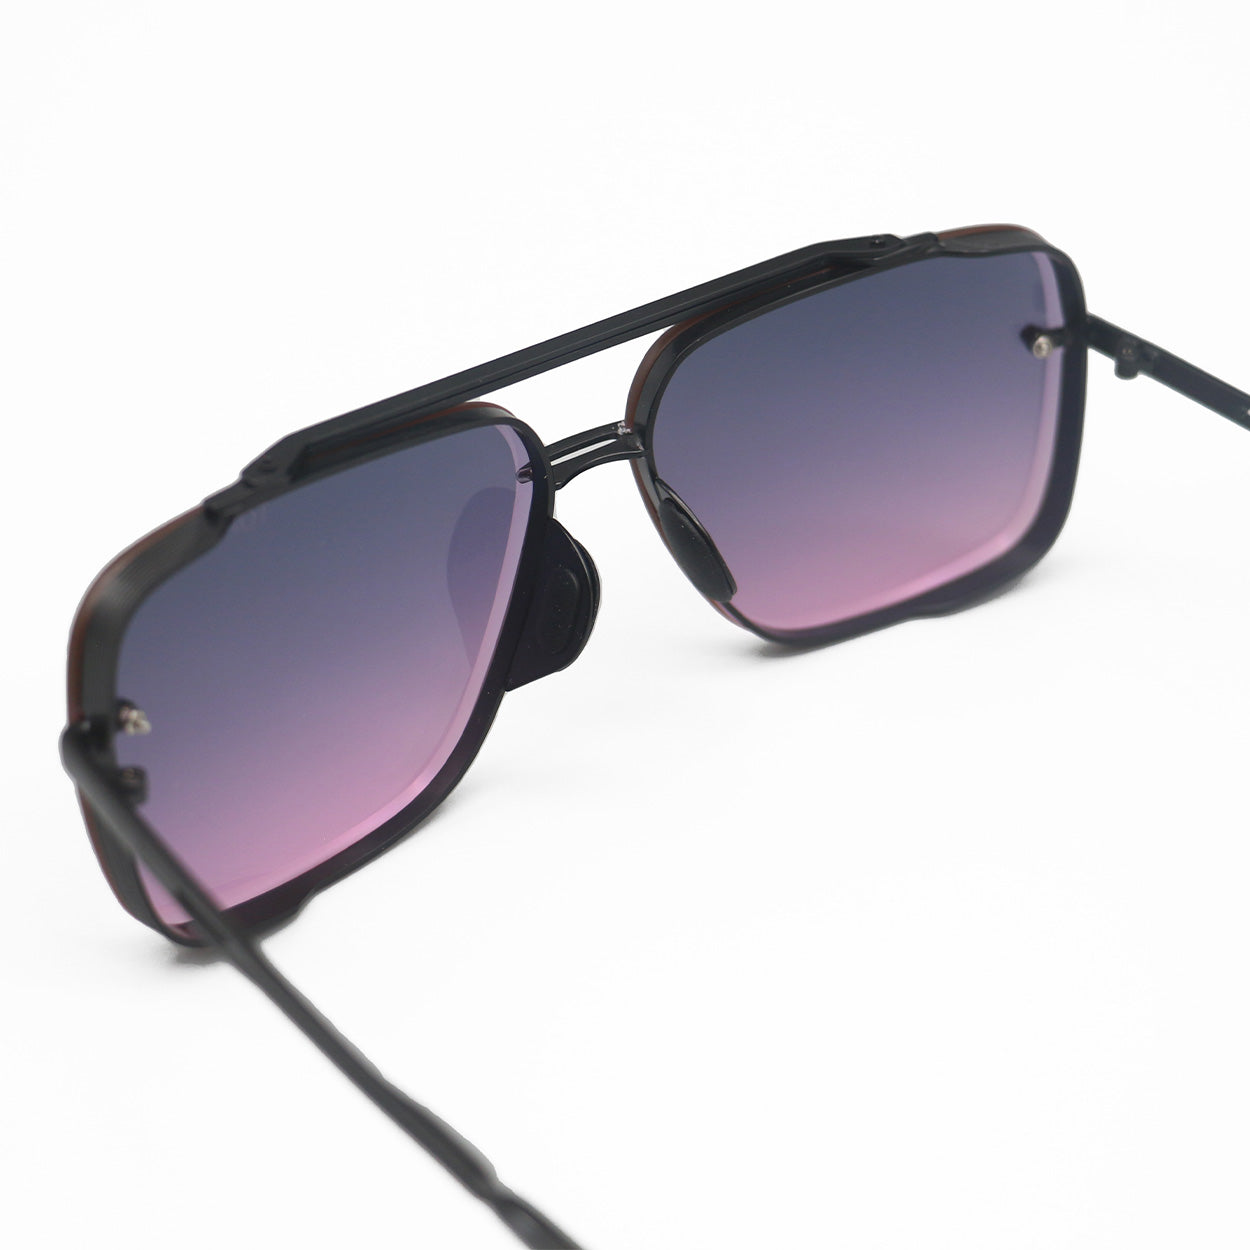  Bella Sunglasses are square aviators with faded purple to pink lenses and black metal details. Including tangle free technology.